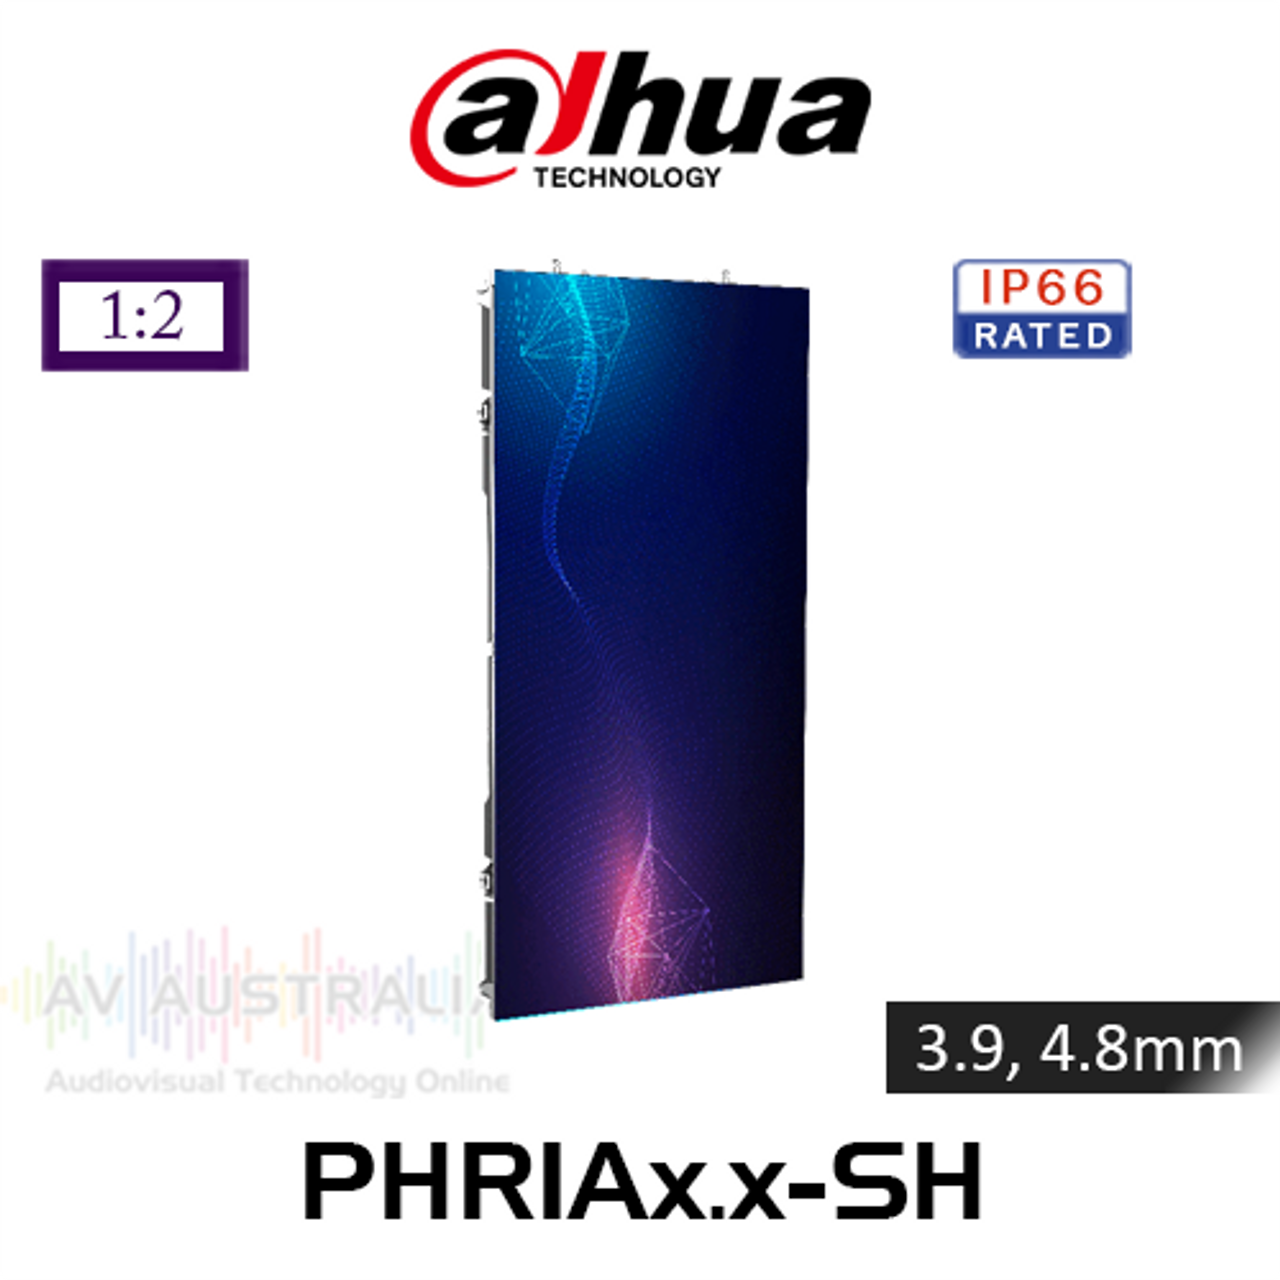 Dahua PHROAx.x-MH IP66 Outdoor Rental Fine Pixel Pitch LED Cabinet (3.9, 4.8mm) 